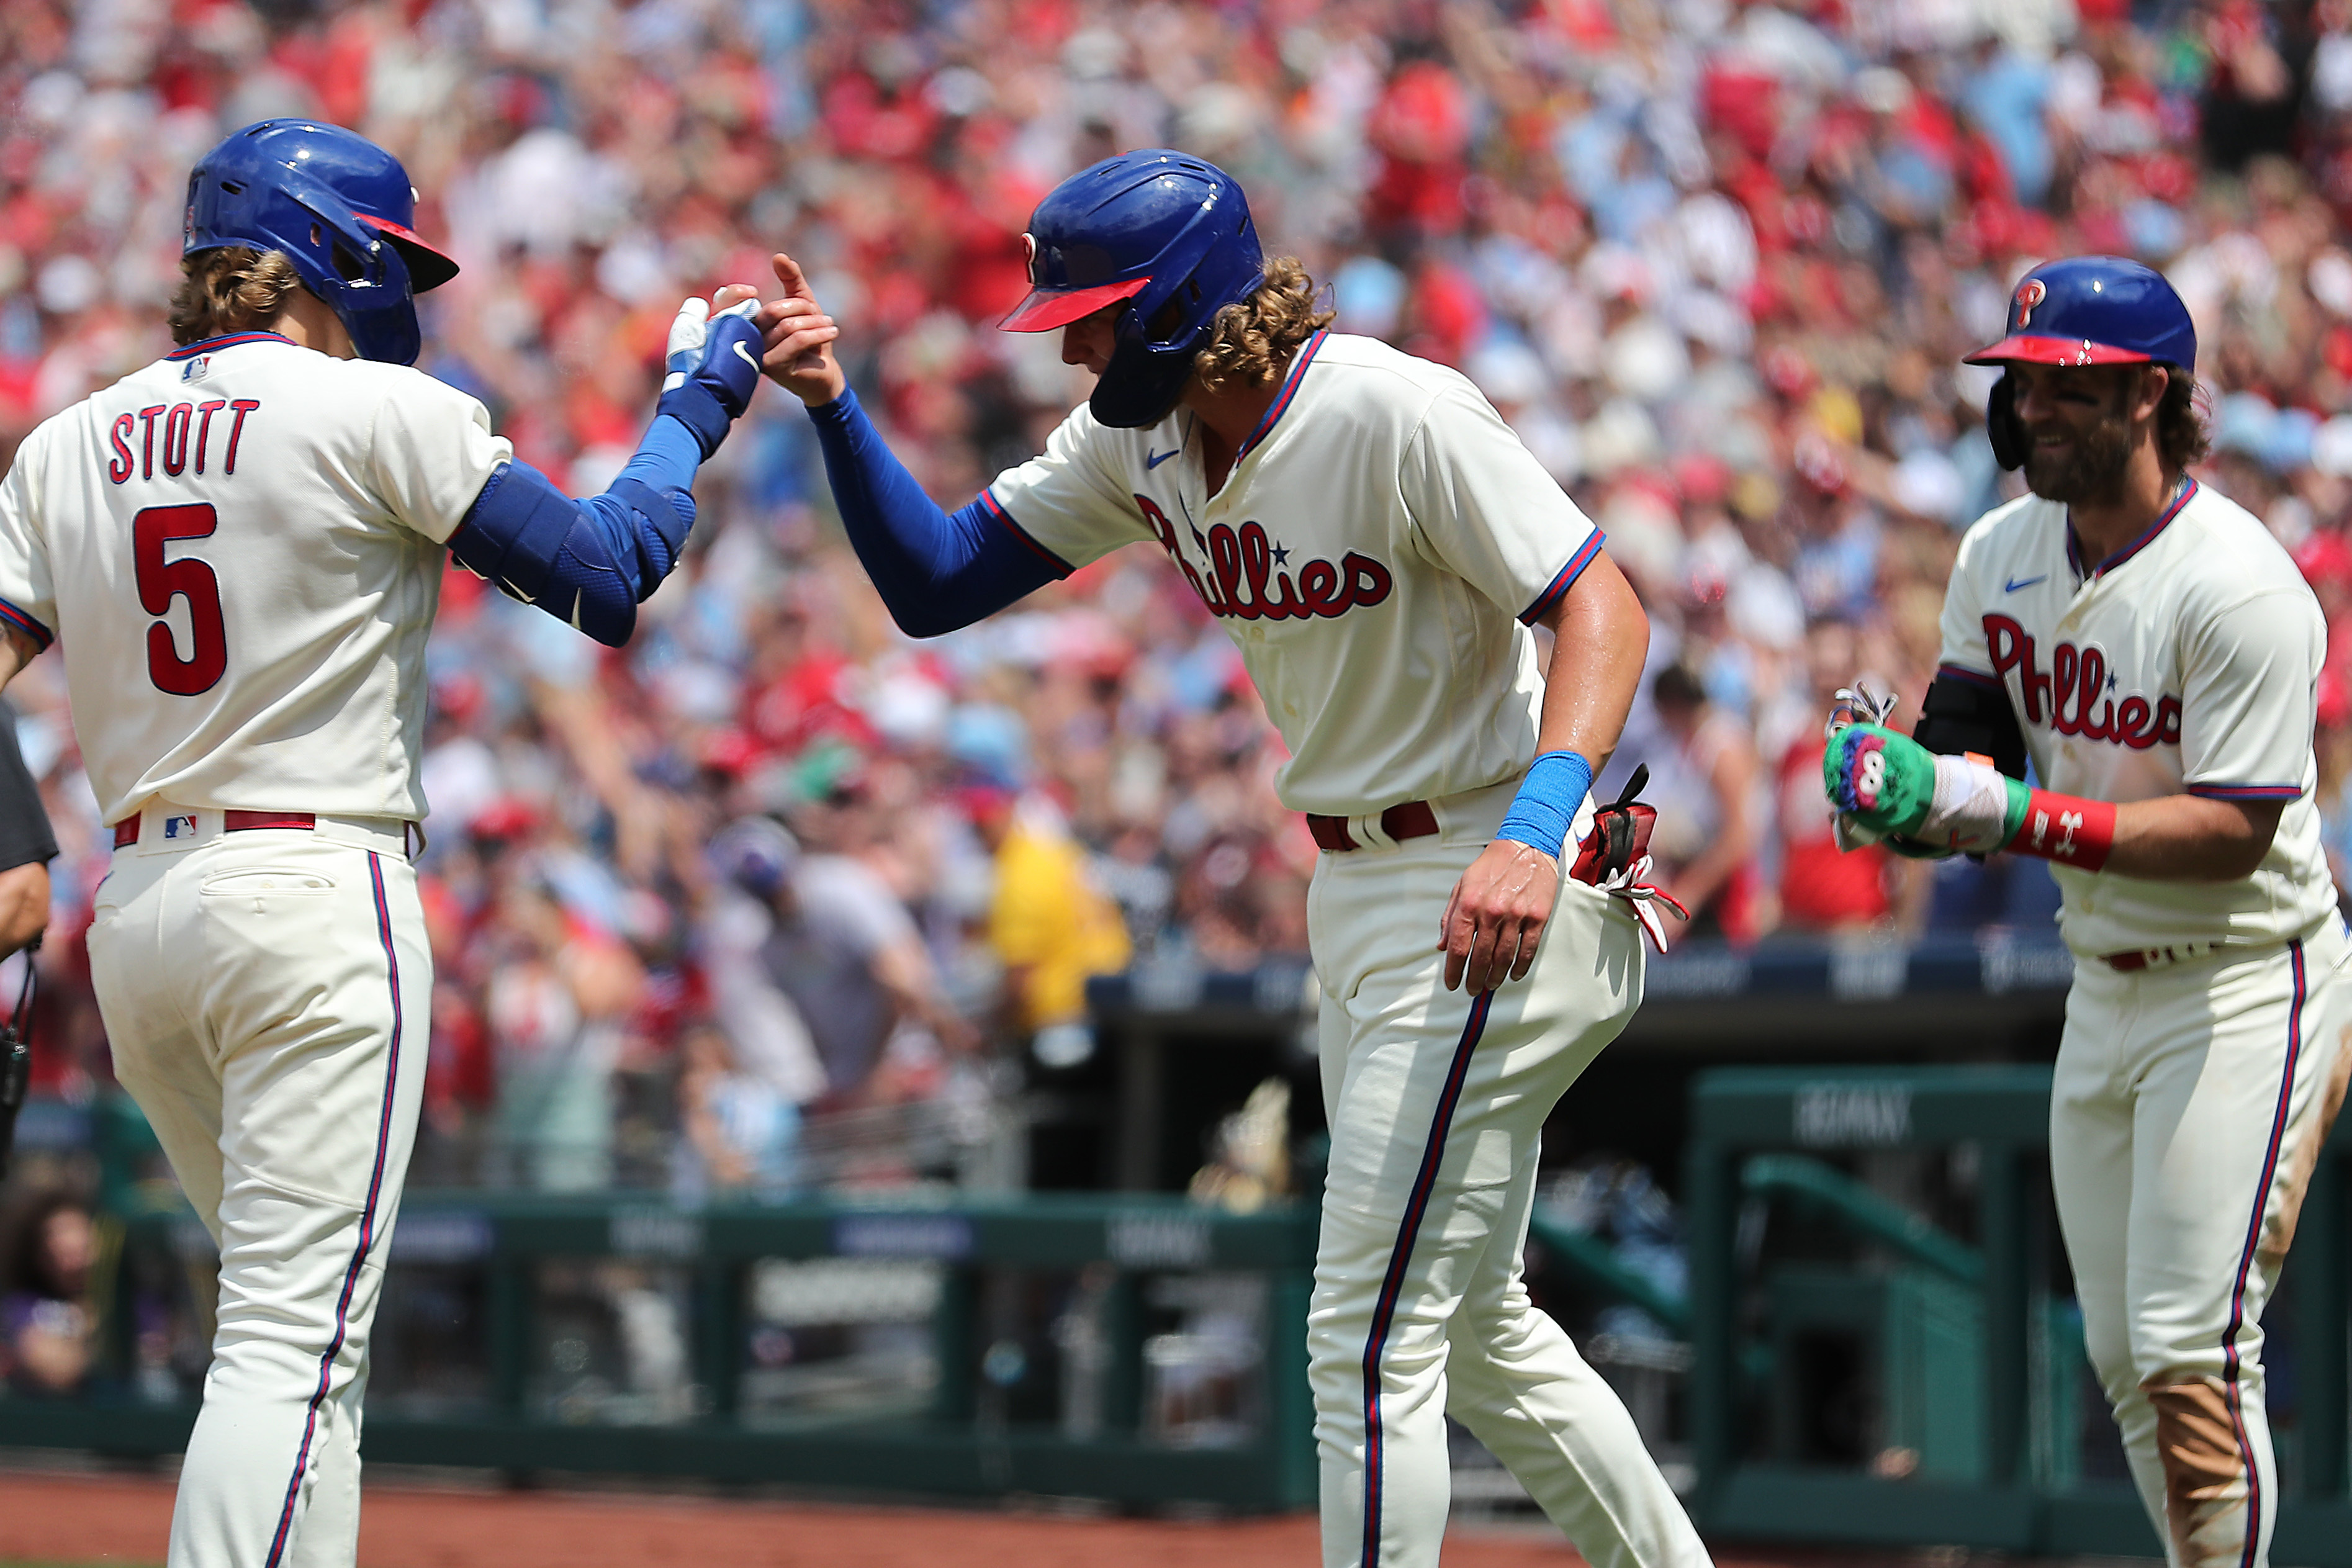 Kyle Schwarber, Nick Castellanos come up big for Phillies in 8-4